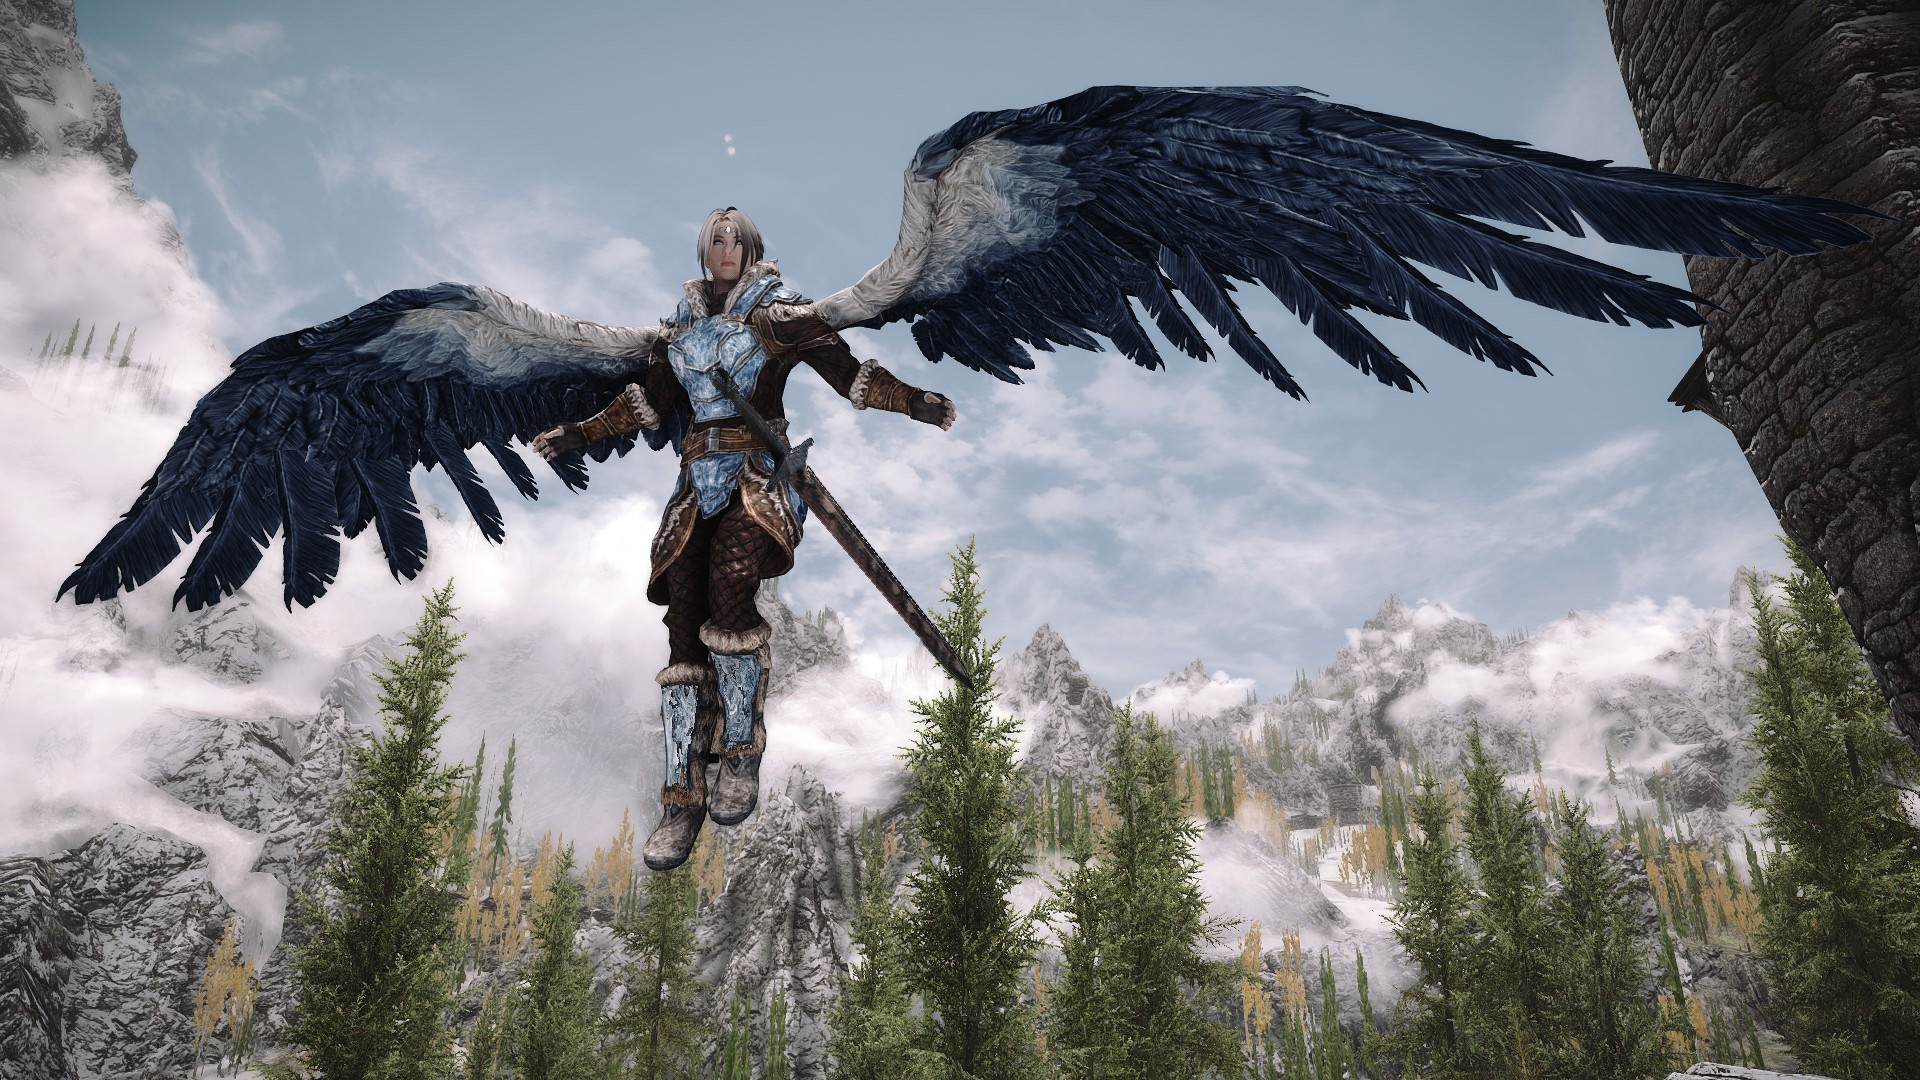 These Skyrim mods let you grow wings and fly over the skies of Tamriel |  PCGamesN